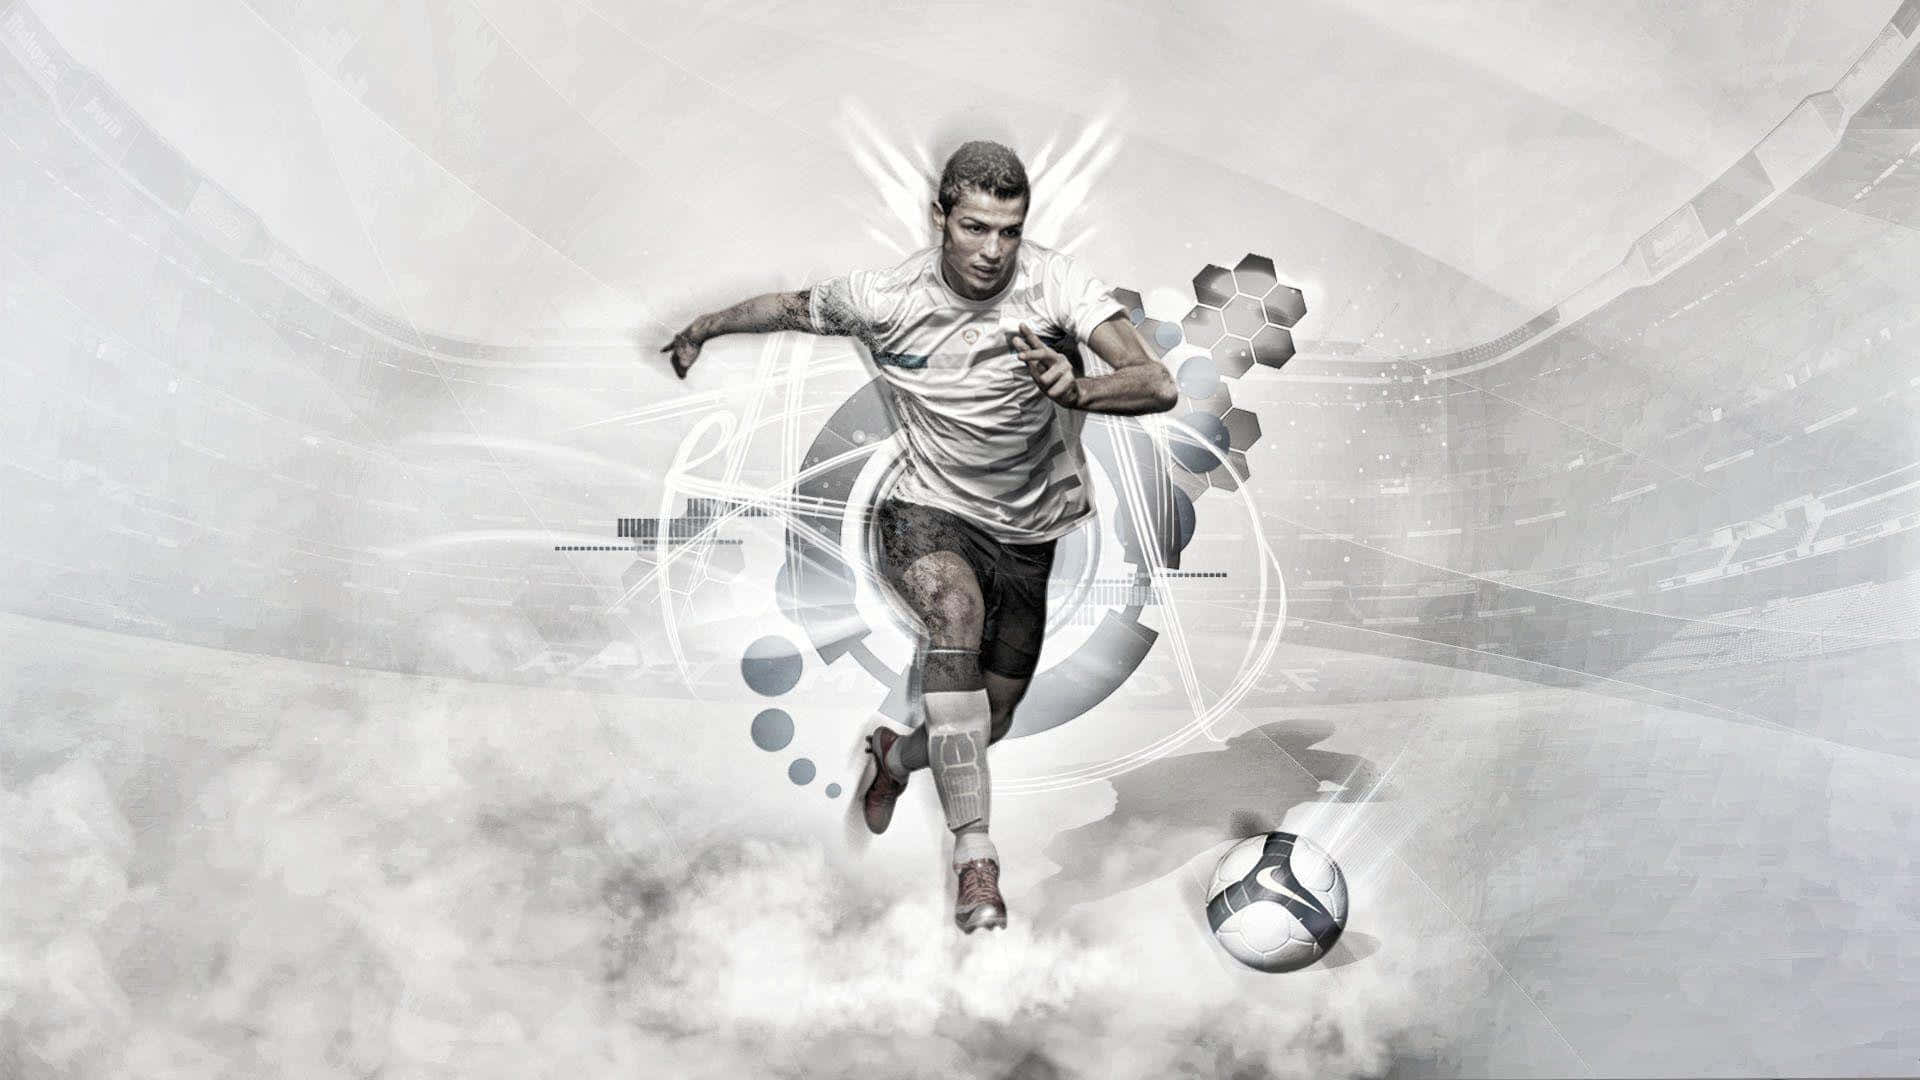 Cristiano Ronaldo leading his team to glory on the soccer field Wallpaper